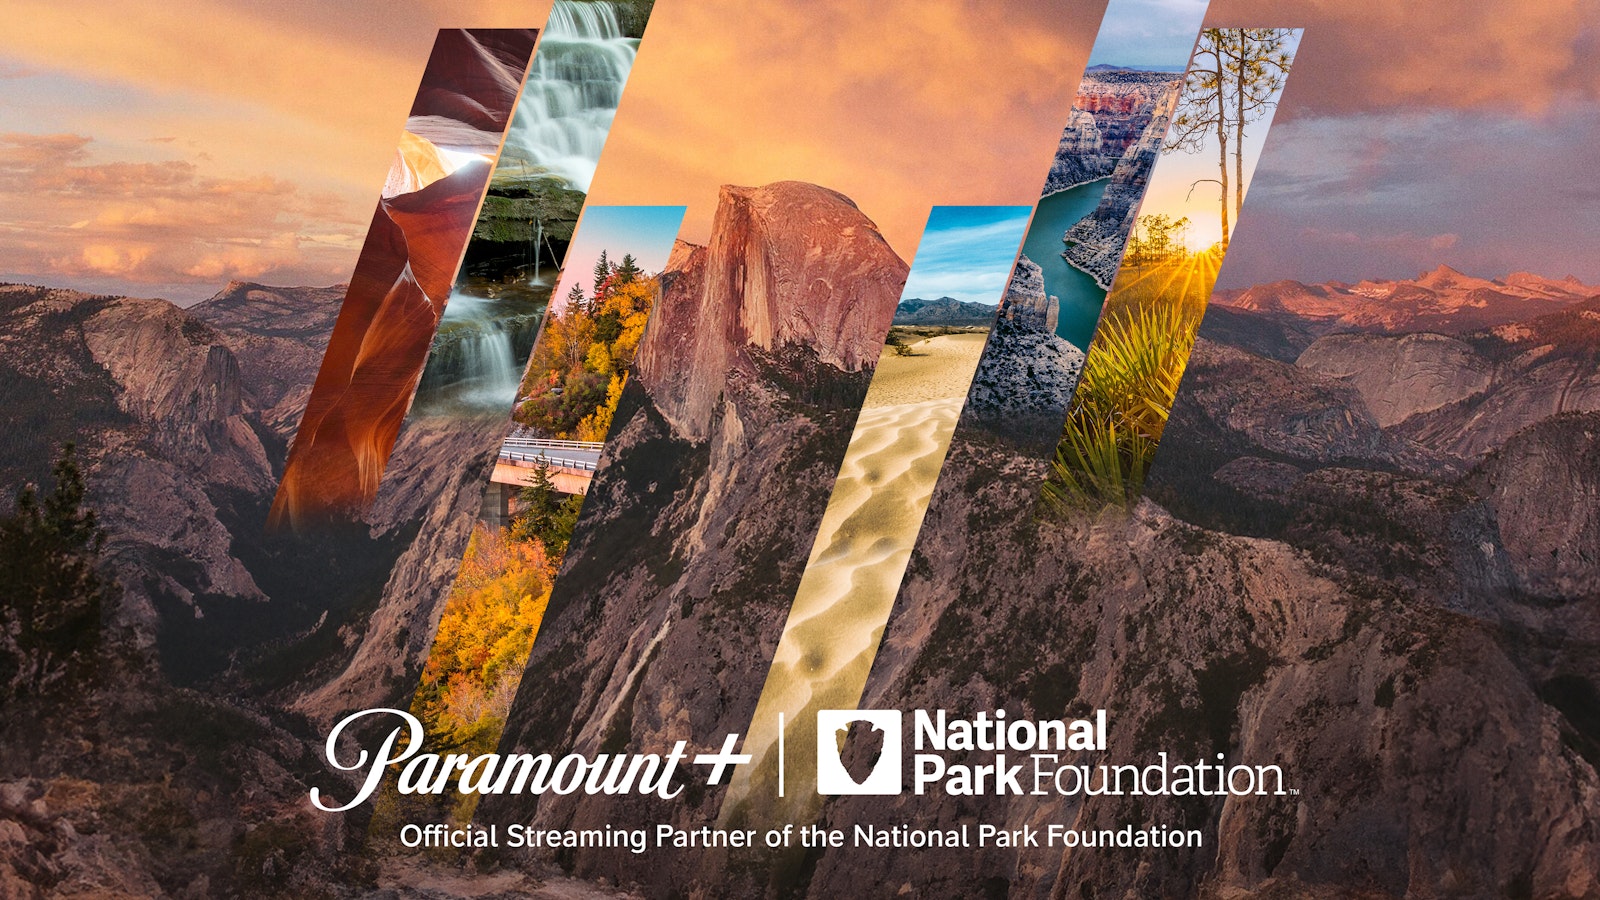 A canyon at sunset with the Paramount+ and National Park Foundation logos overlaid with text that reads "Official Streaming Partner of the National Park Foundation"